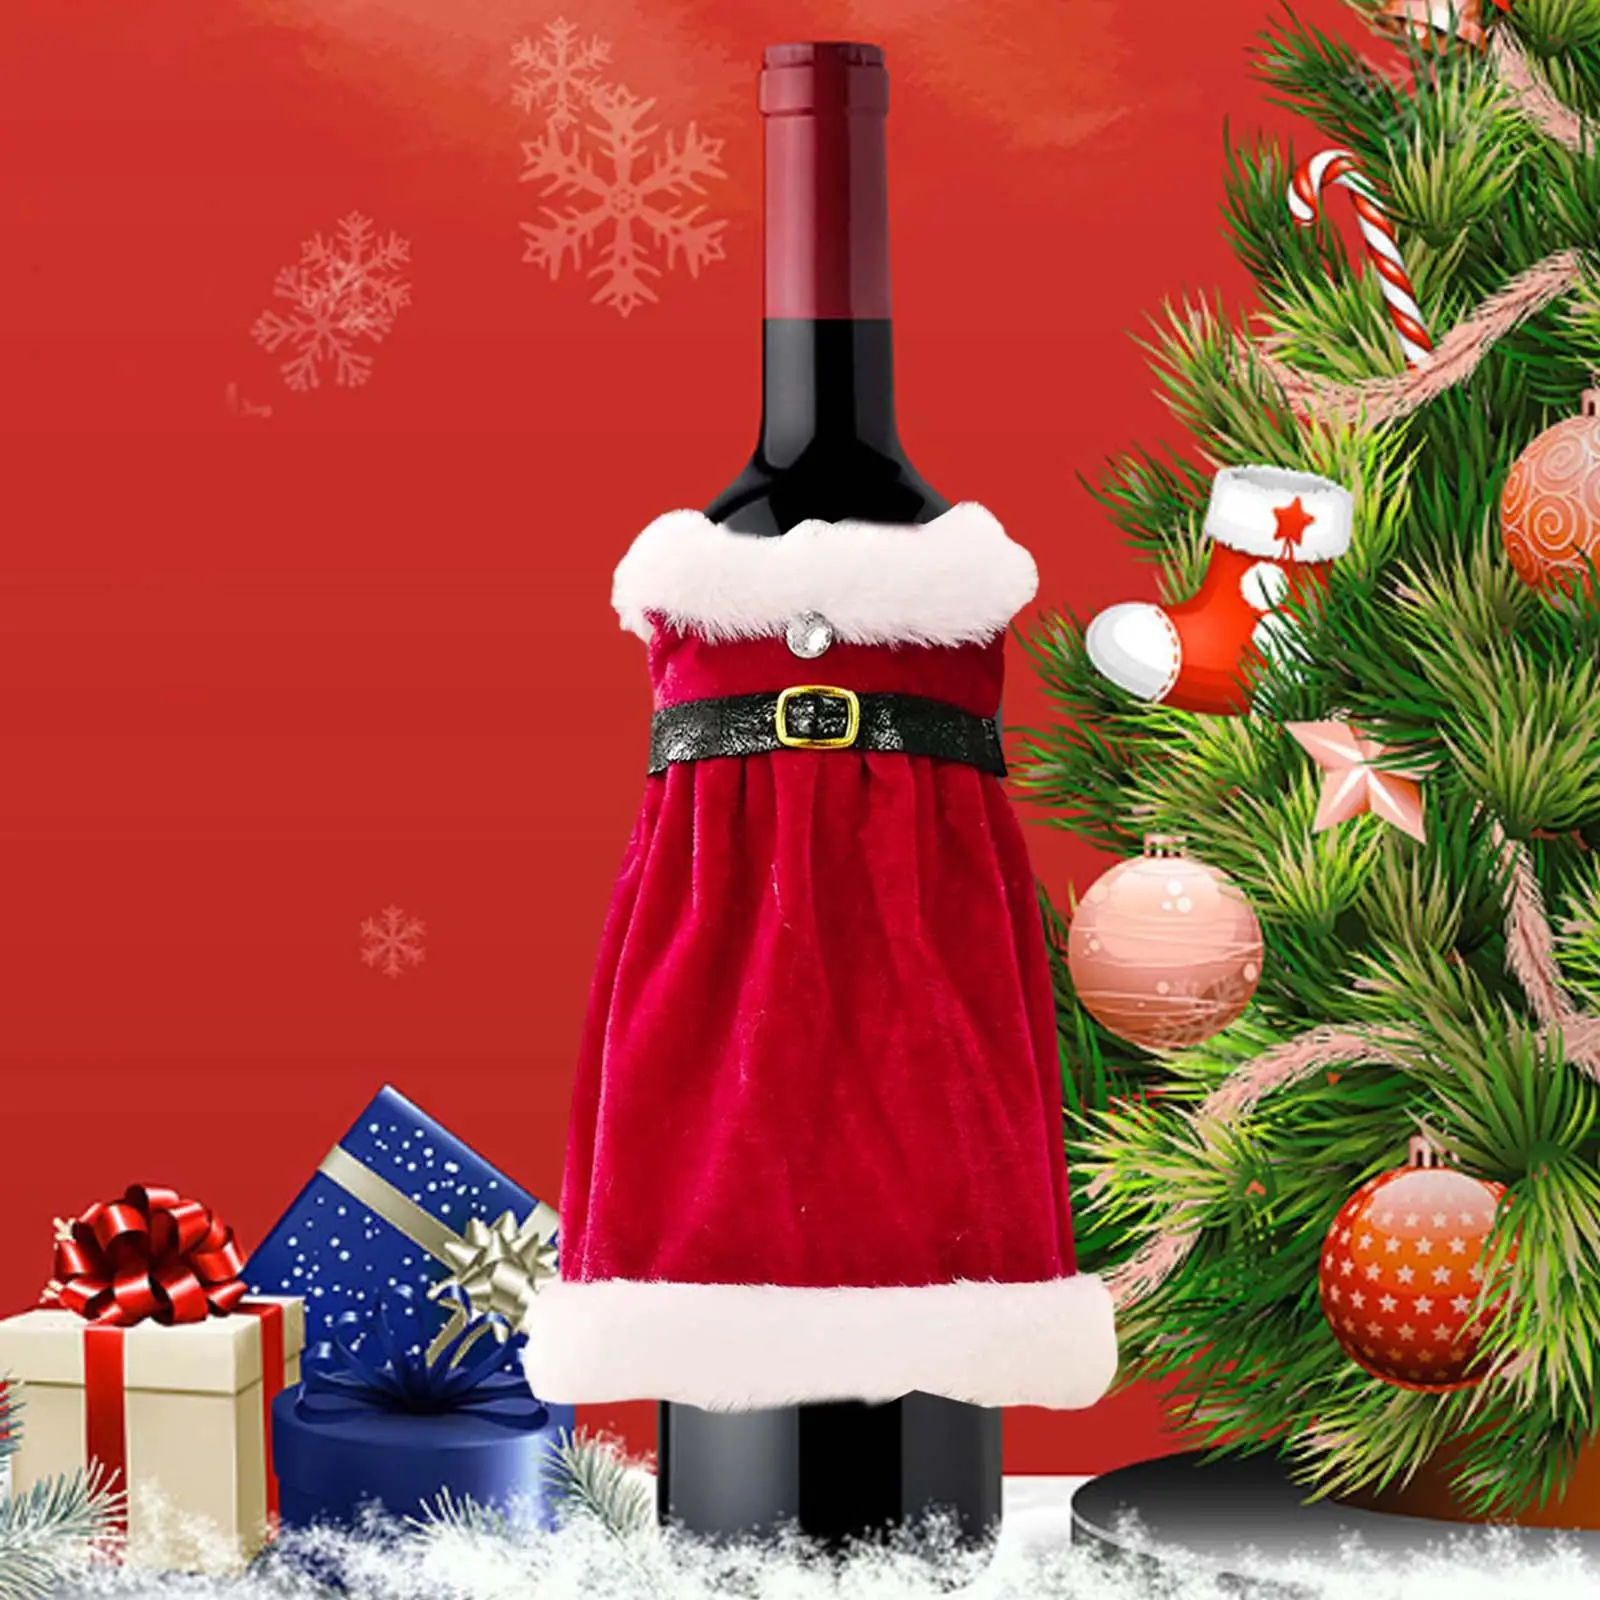 Christmas Red Dress Bottle Cover Holiday Gift Adorable Party Decoration Desktop Decor Party Supplies Wine Bottle Bag